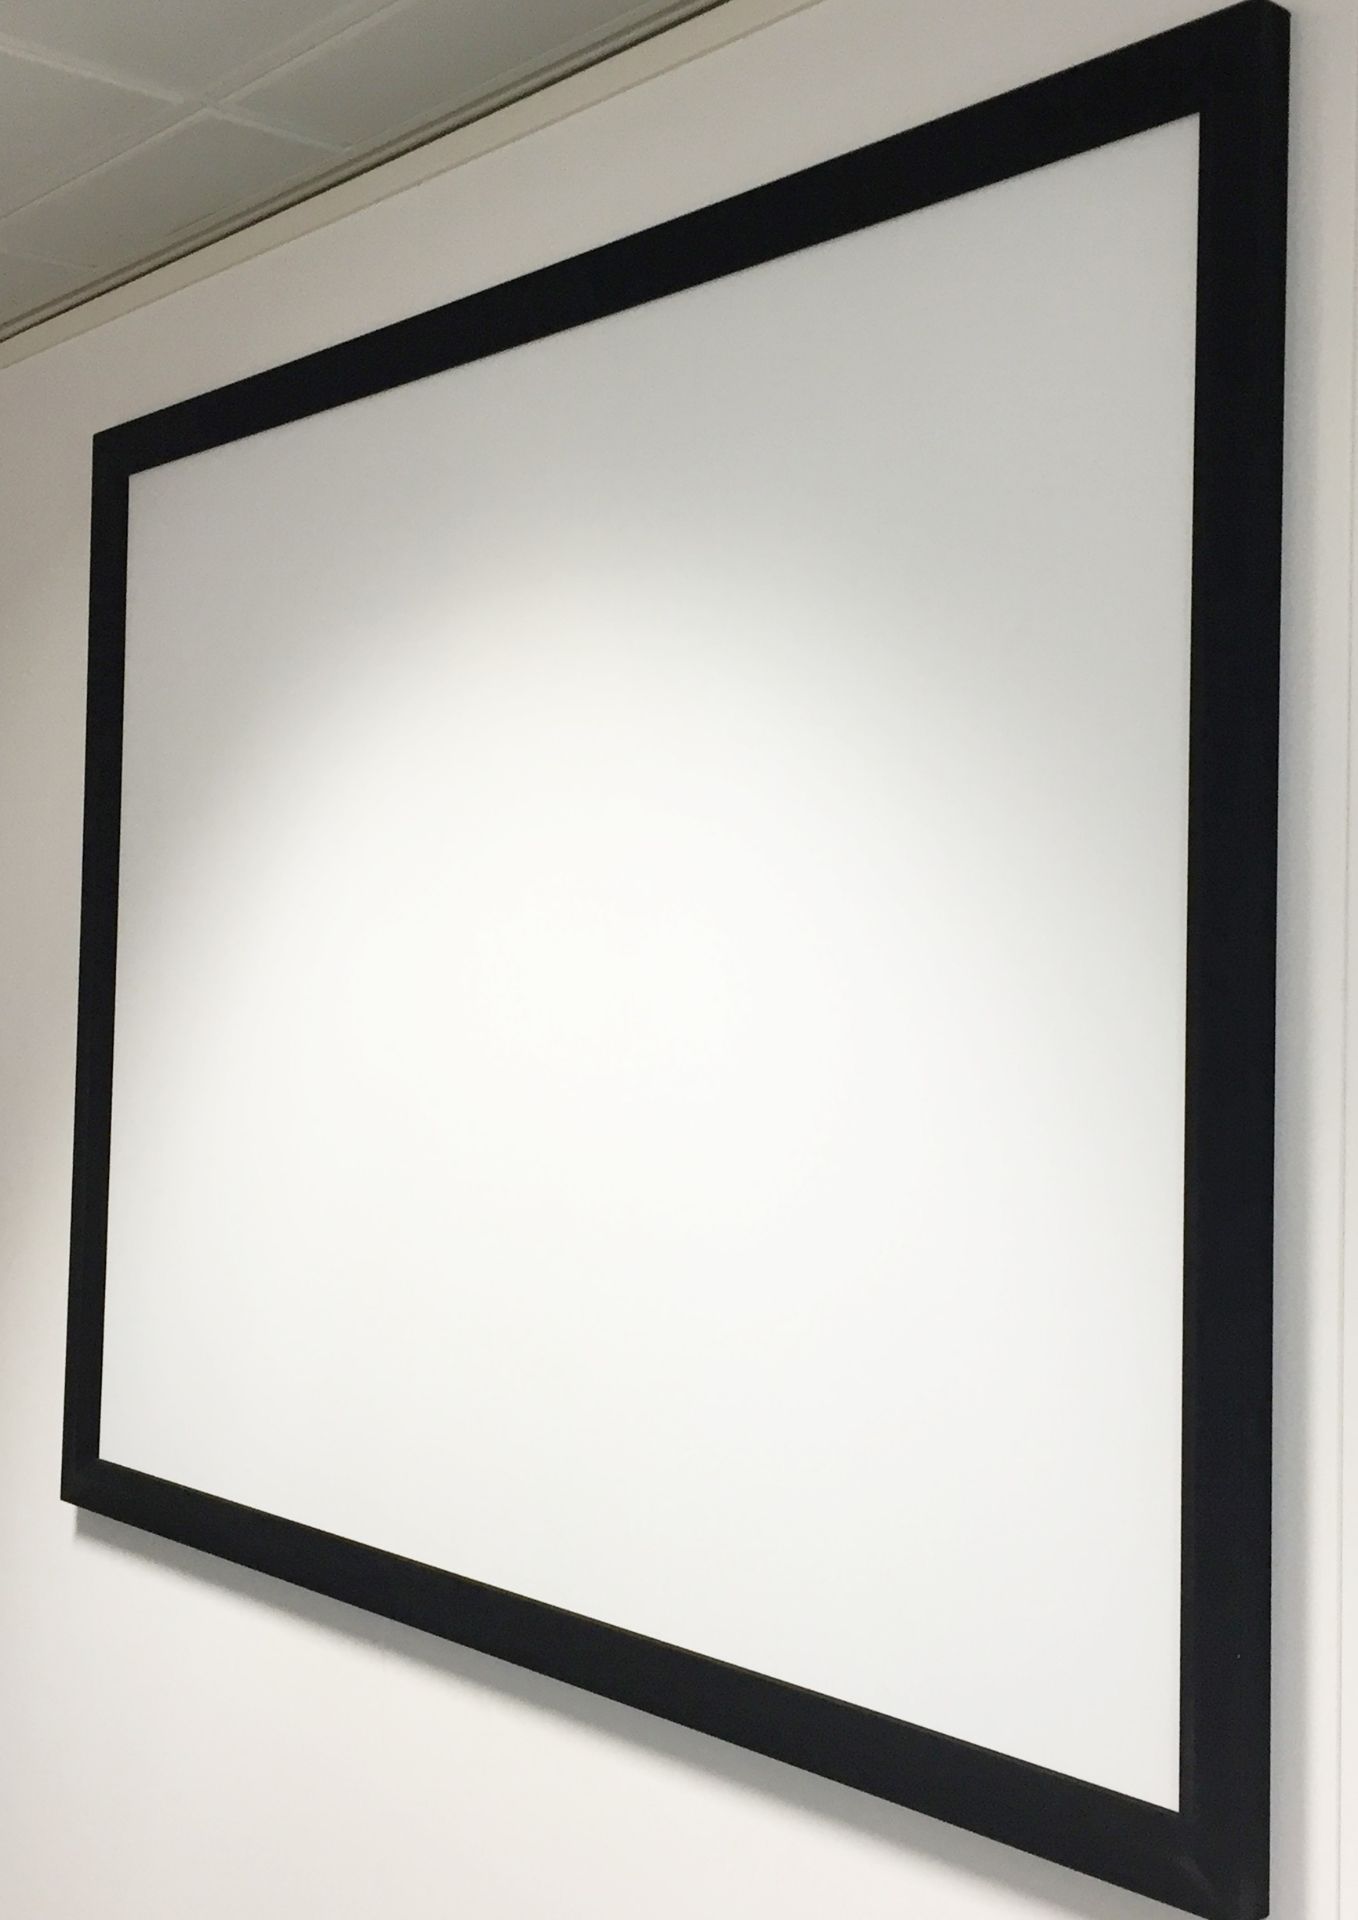 1 x Fixed Frame CINEMATIC Projection Screen - Large Size With Deep Black Velvet Fixed Surround - Image 2 of 5